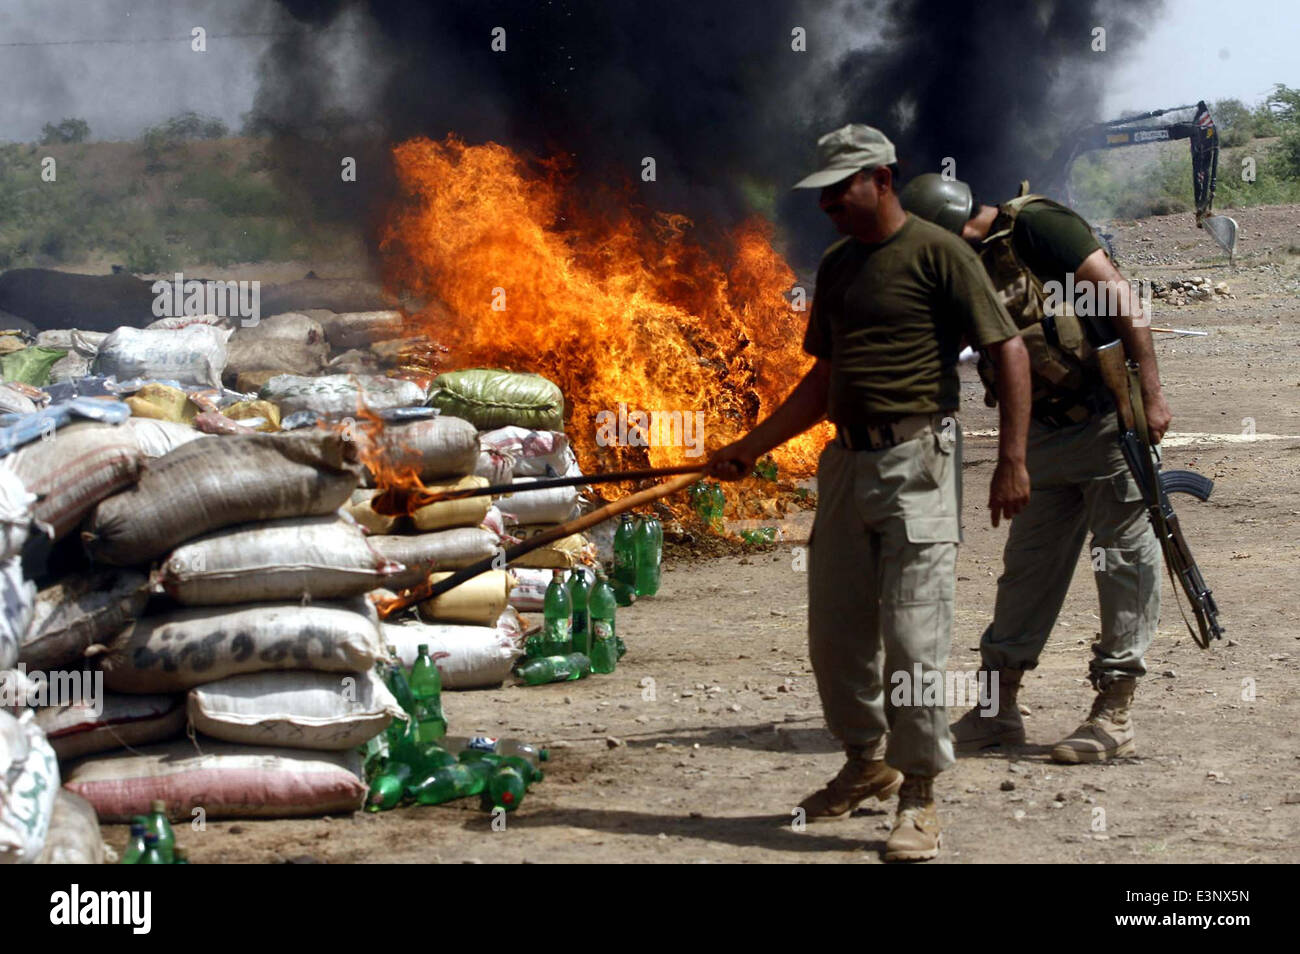 Anti-Narcotics Force (ANF) officials burn pile of confiscated drugs during ceremony on the occasion of International Day against Drug Abuse and Illicit Trafficking held in Khyber Agency on Thursday, June 26, 2014. As the world observes International Day against Drug Abuse and Illicit Trafficking. Pakistan annually seizes huge quantities of drugs which straddle a route from neighboring Afghanistan, destined for lucrative markets in the Middle East. Stock Photo